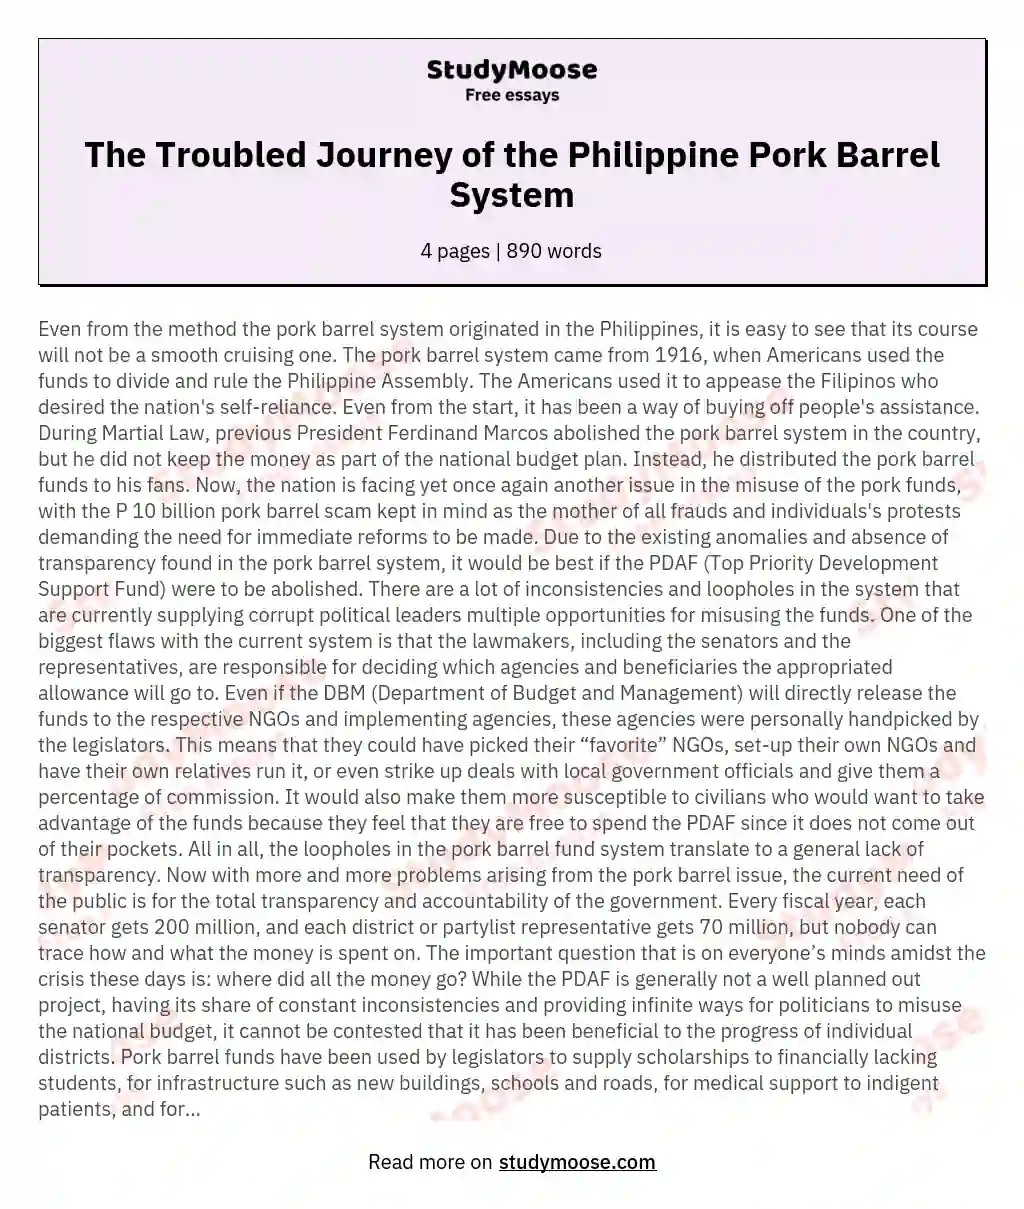 The Troubled Journey of the Philippine Pork Barrel System essay